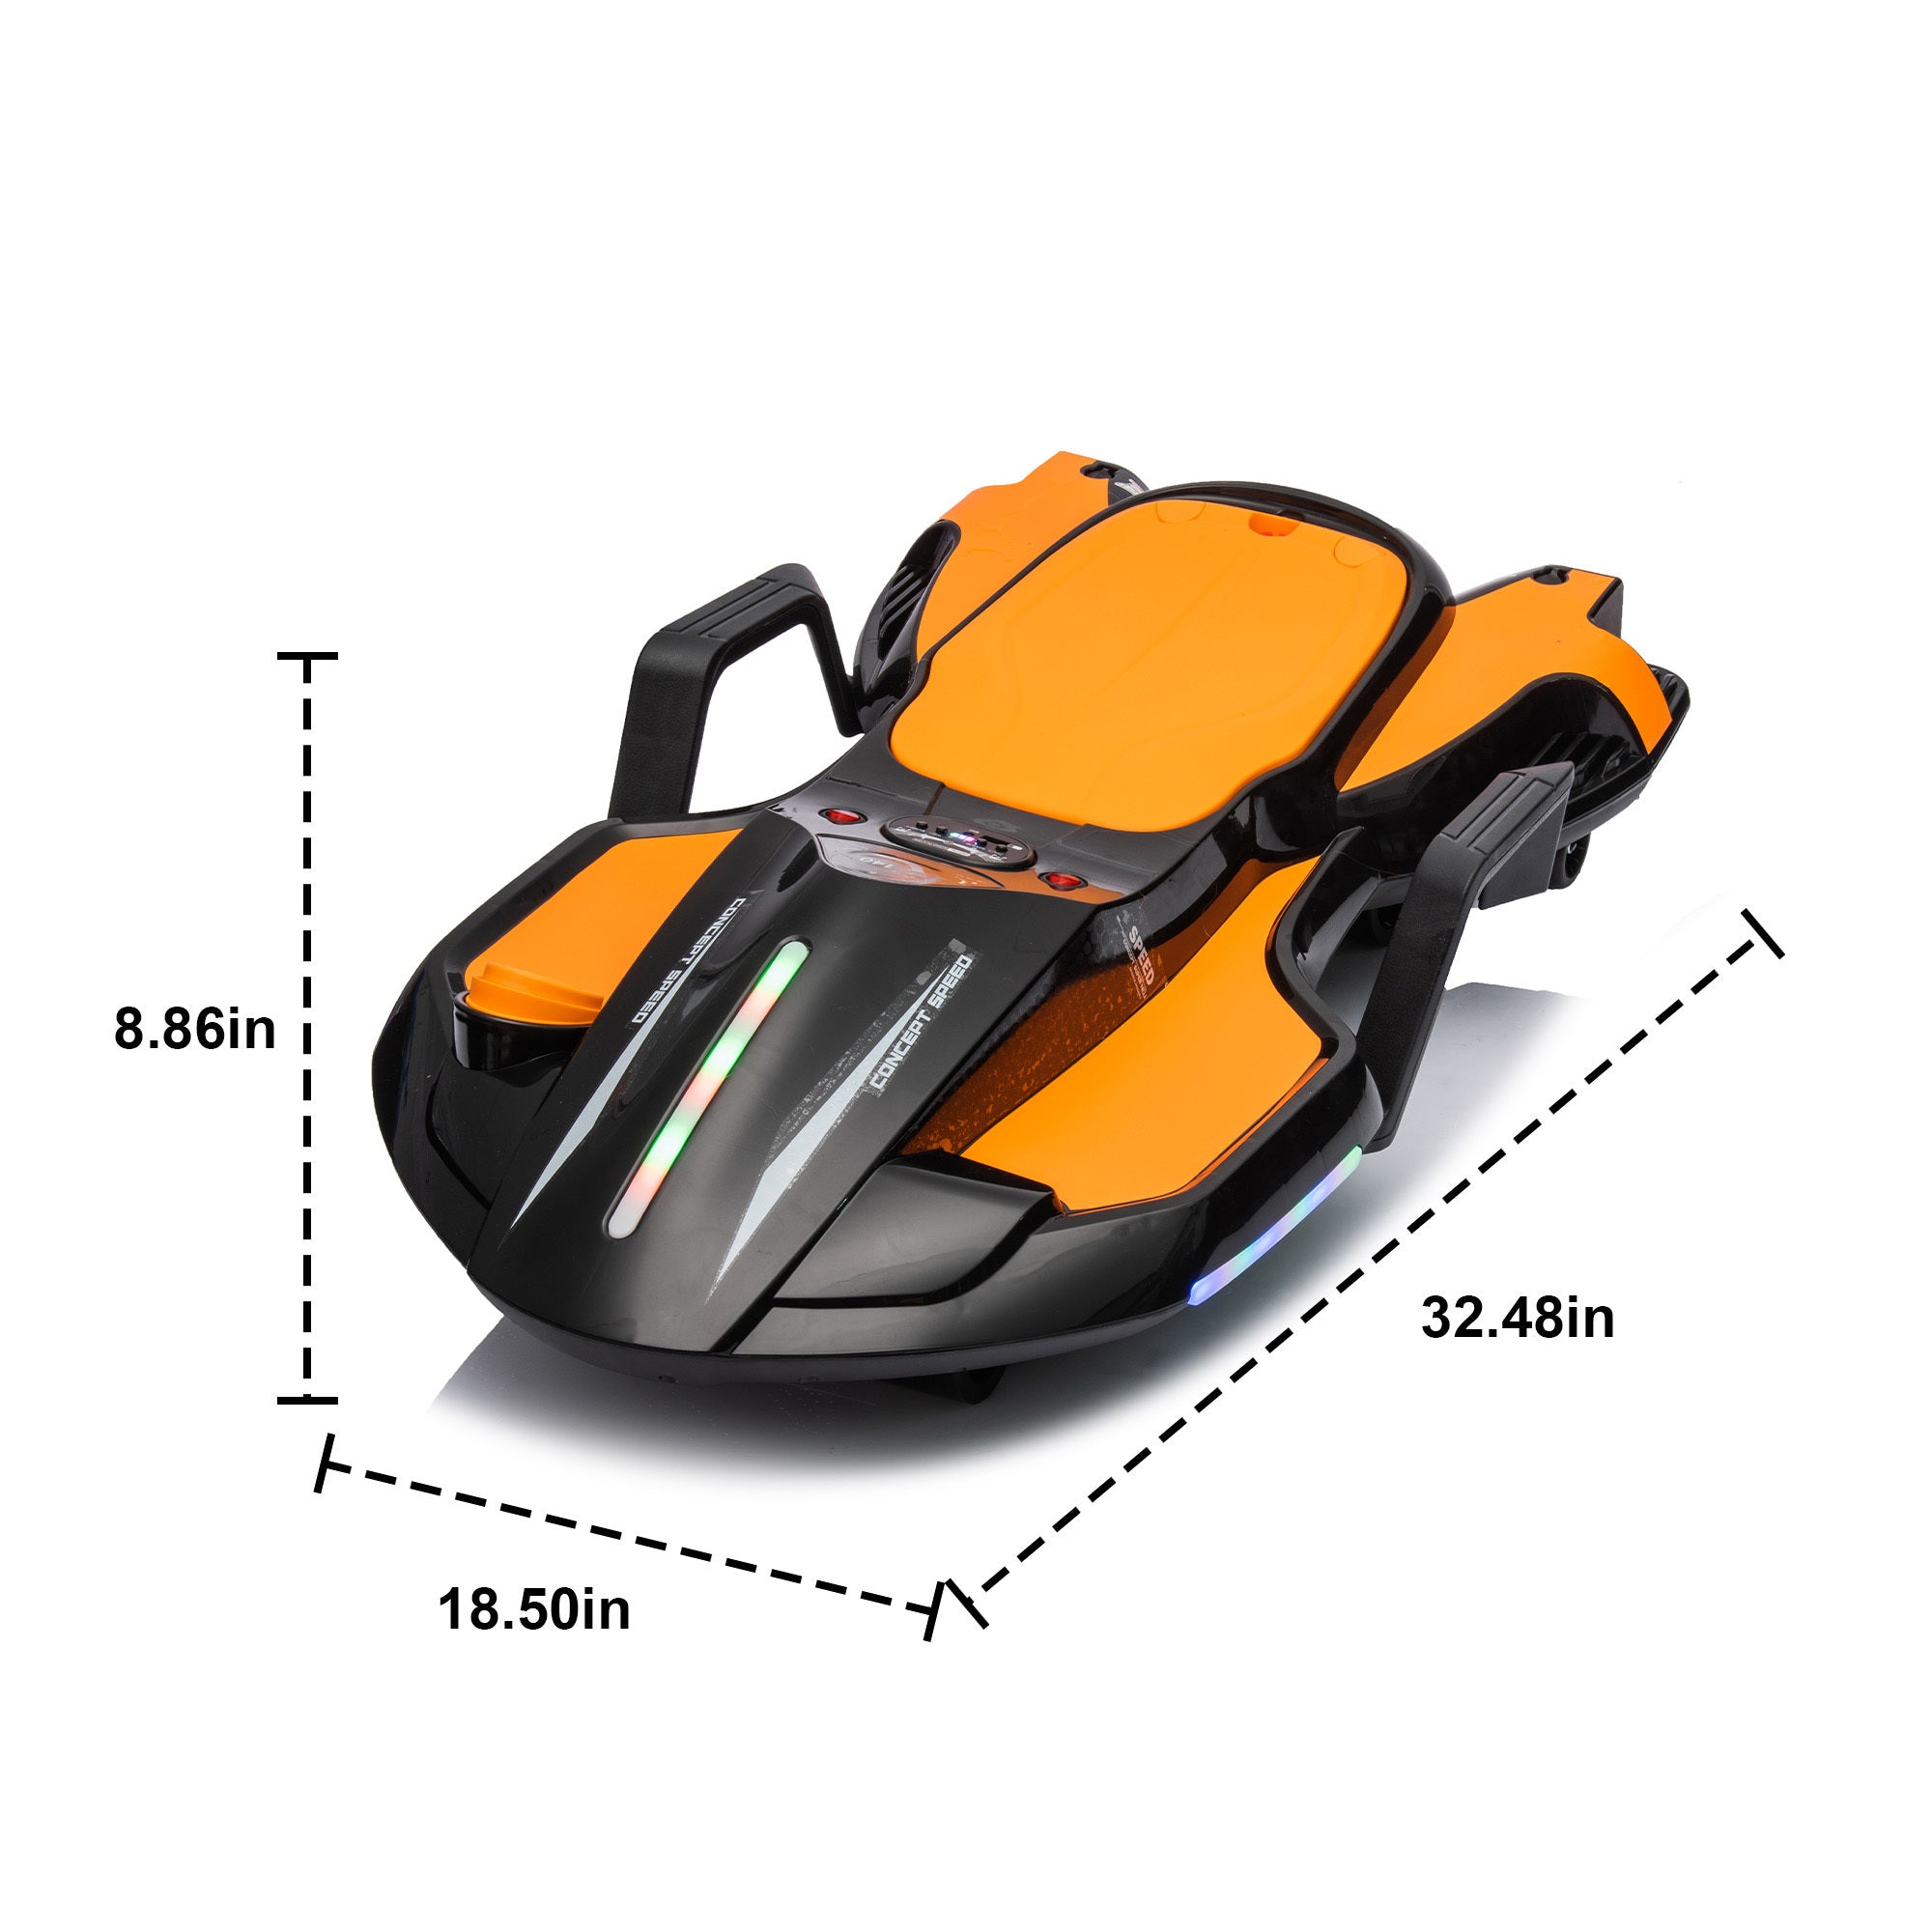 🆓🚛 24V Kids Ride On Electric Scooter W/ Helmet Knee Pads, Spray Function, 200W Motor, 5.59-6.84MPH, Gravity Steering, Bluetooth, Use for 1-2 Hours, Age 6+, Black & Orange